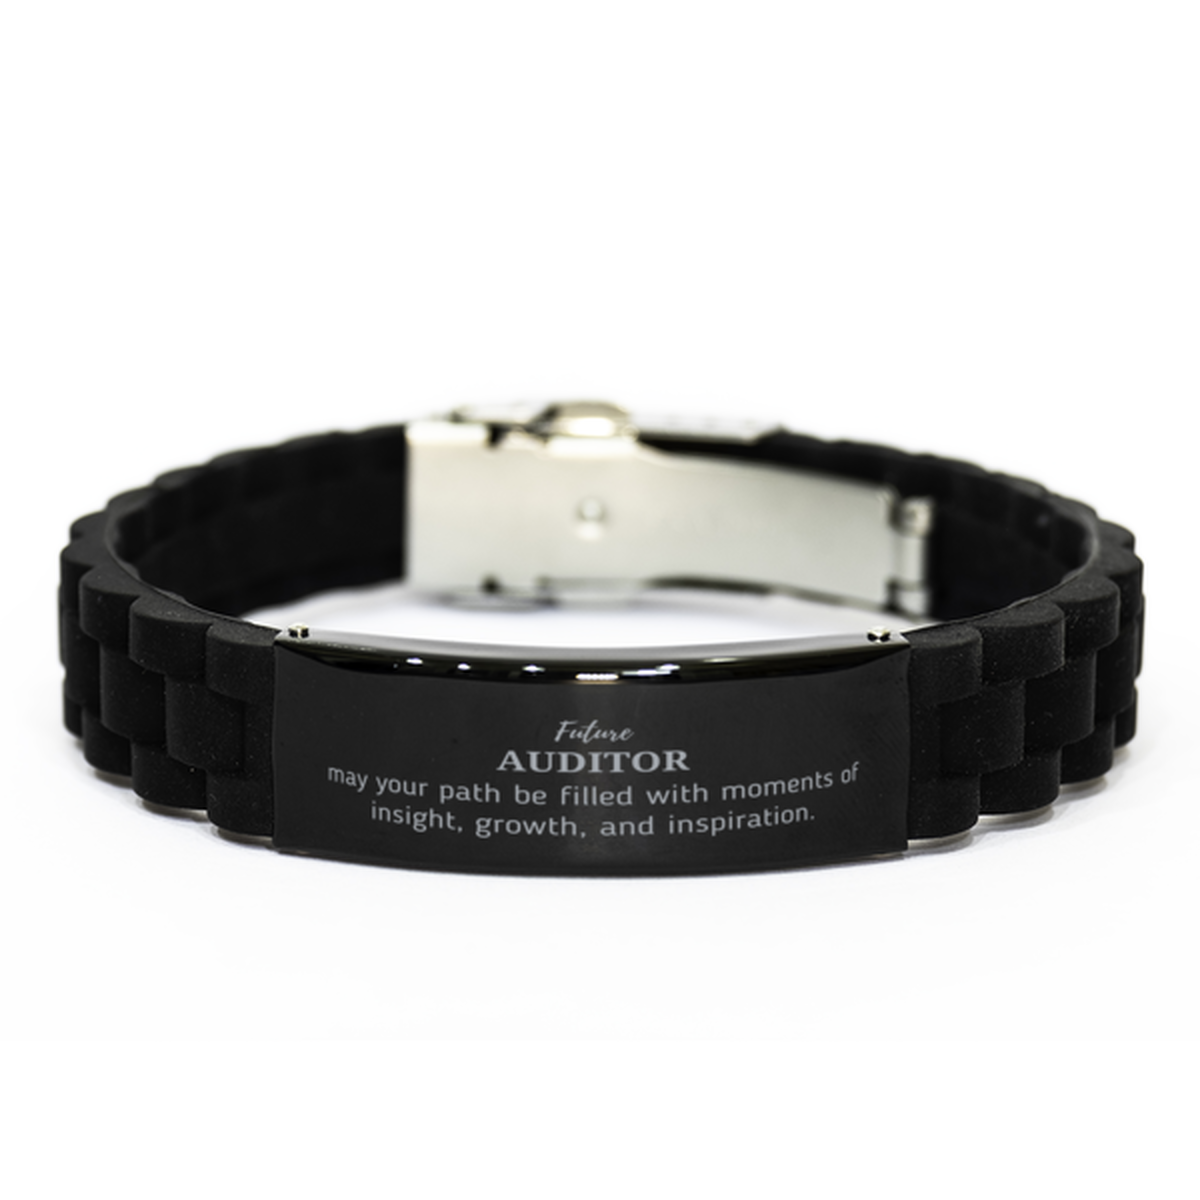 Future Auditor Gifts, May your path be filled with moments of insight, Graduation Gifts for New Auditor, Christmas Unique Black Glidelock Clasp Bracelet For Men, Women, Friends